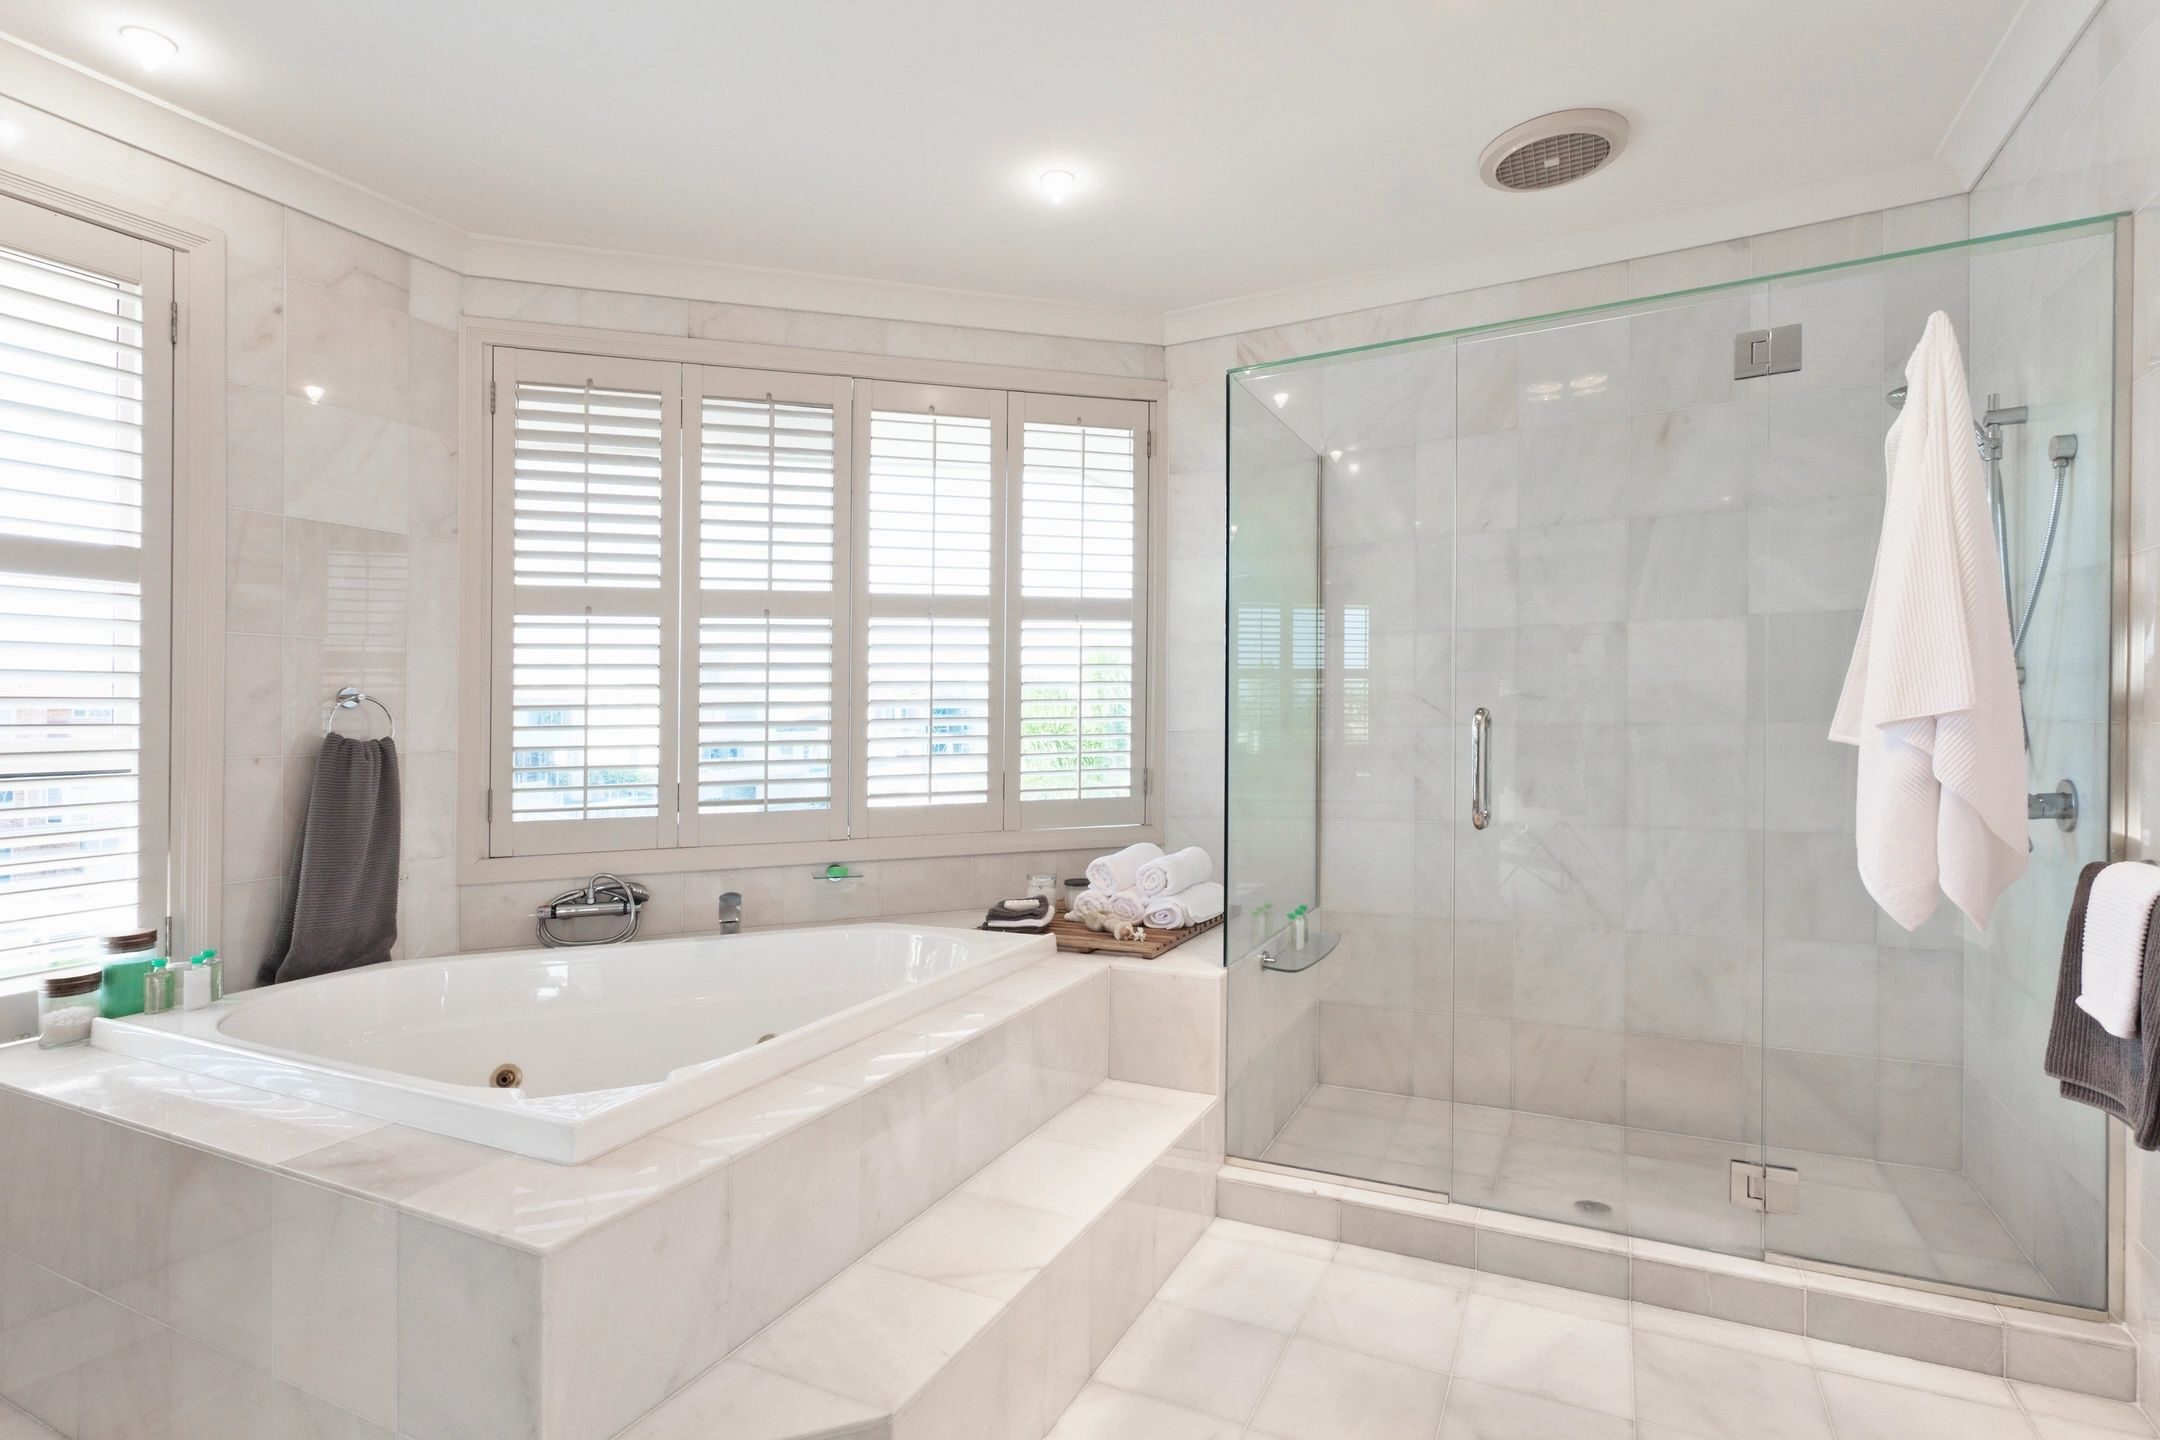 spacious accessible bathroom in whites and beiges with windows and shutters